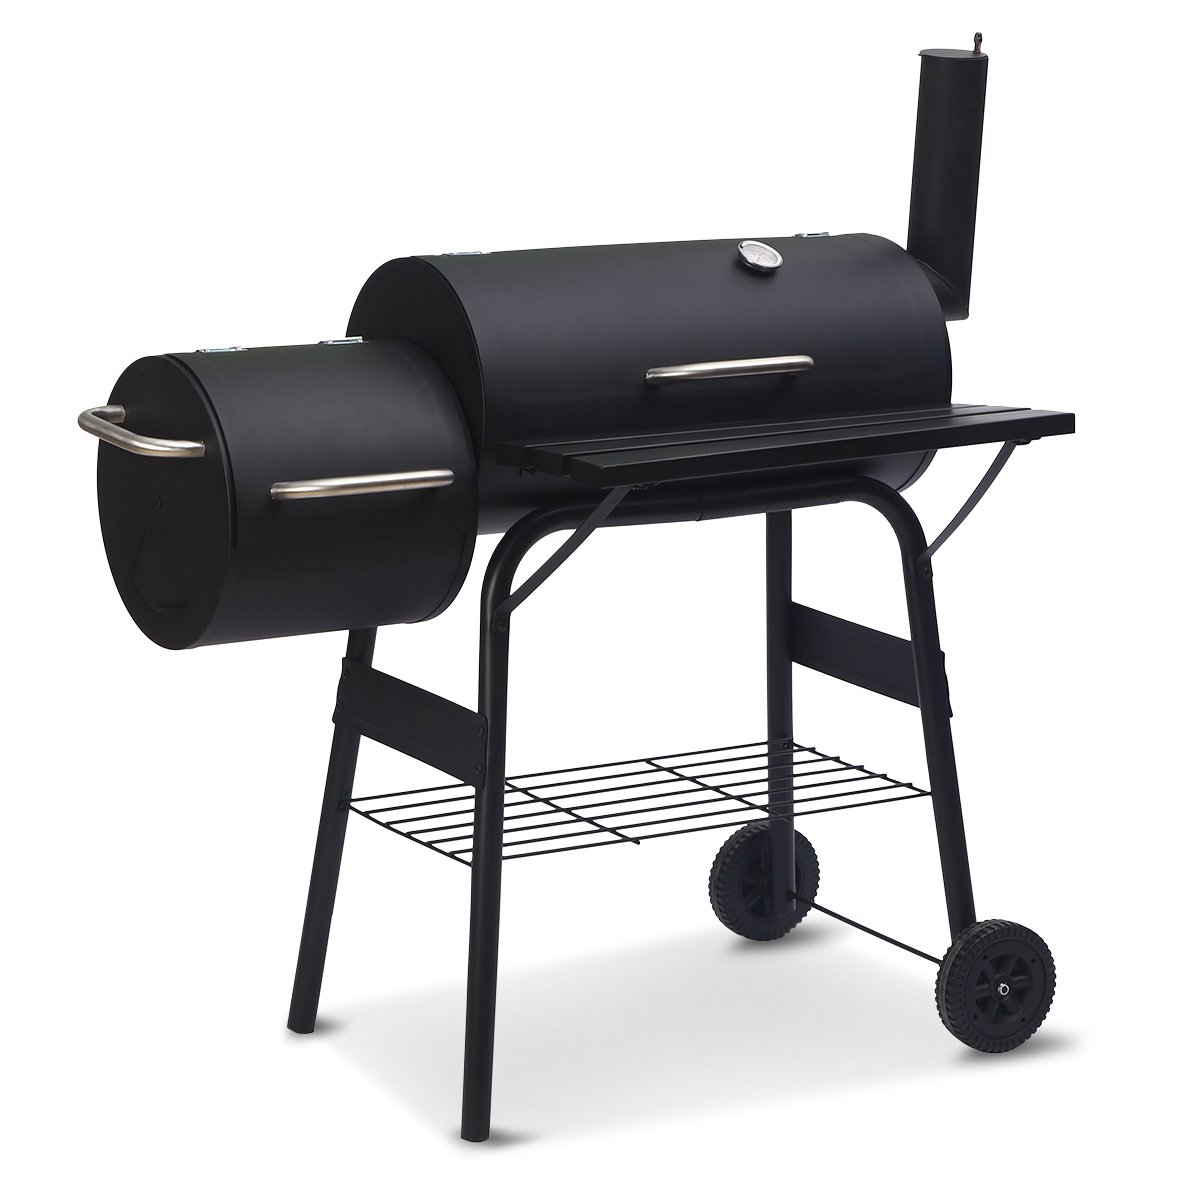 Wallaroo 2-in-1 Outdoor Barbecue Grill & Offset Smoker 1